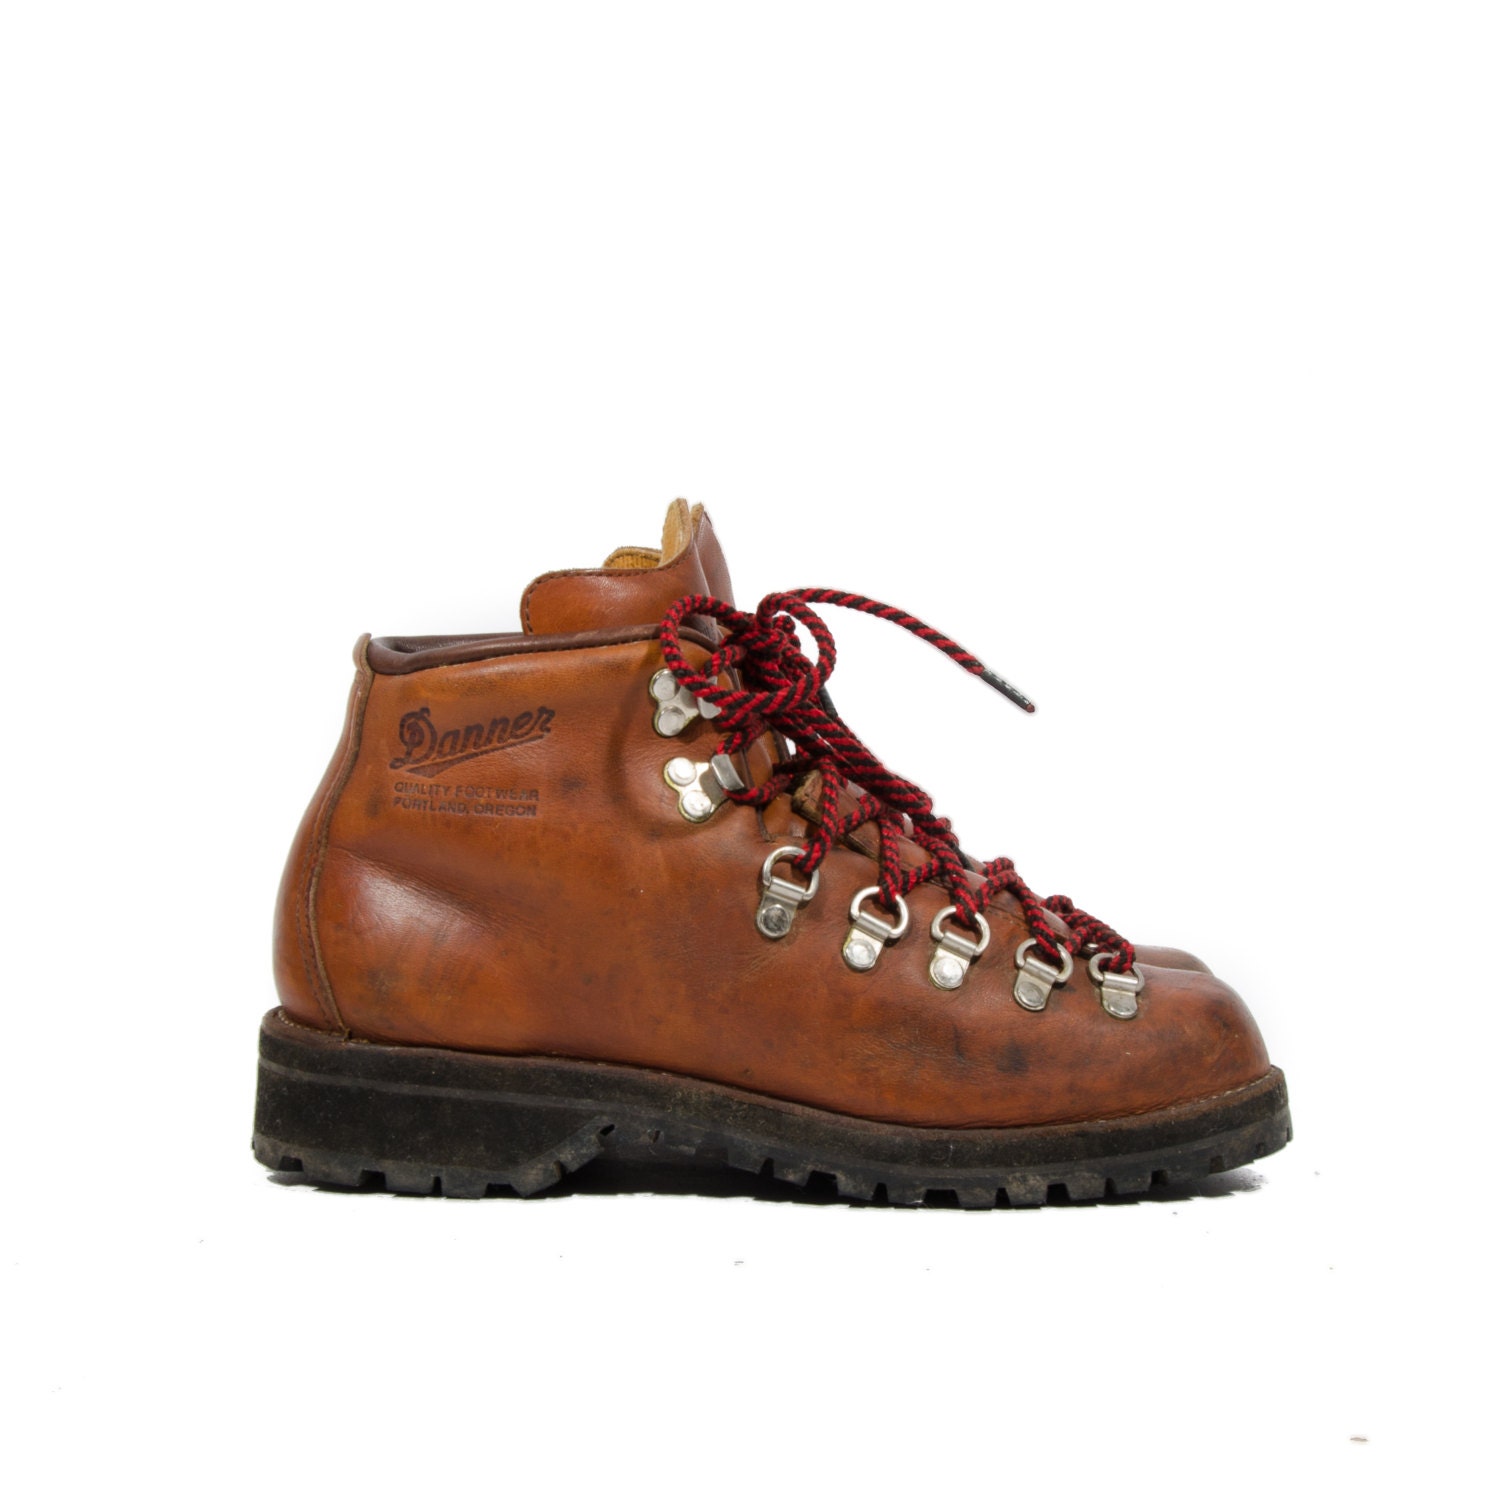 ... Boots Portland, Oregon Brown Leather Hikers Women Hiking Boots size 7